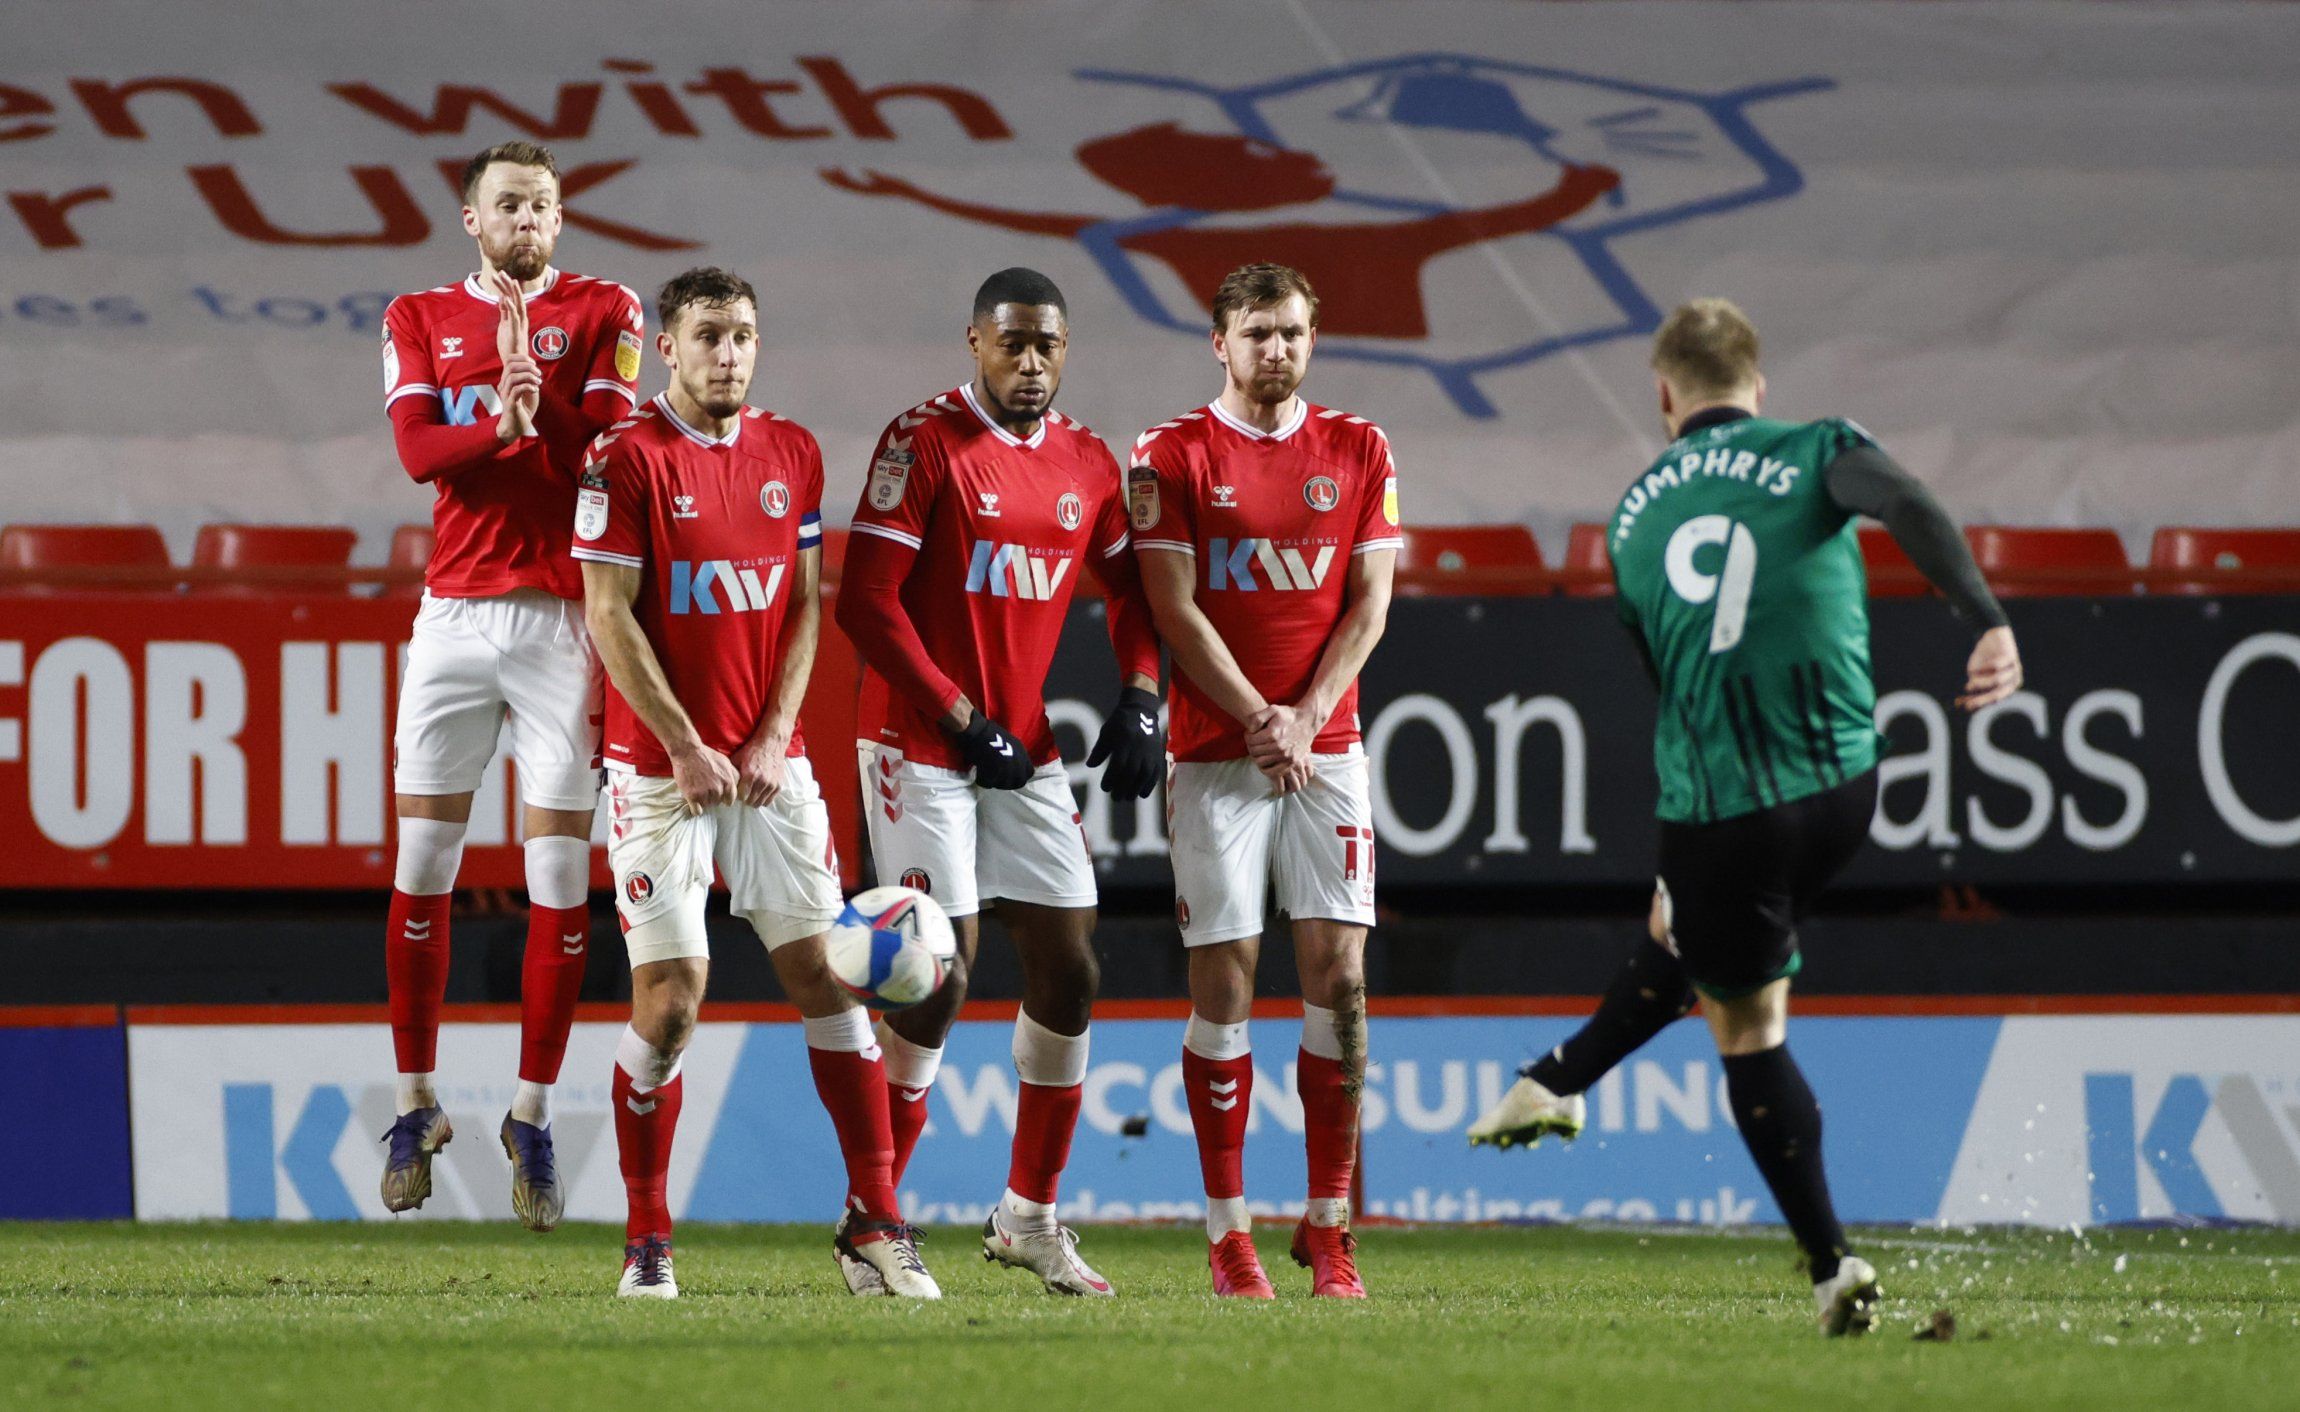 charlton athletic players in the wall vs rochdale league one